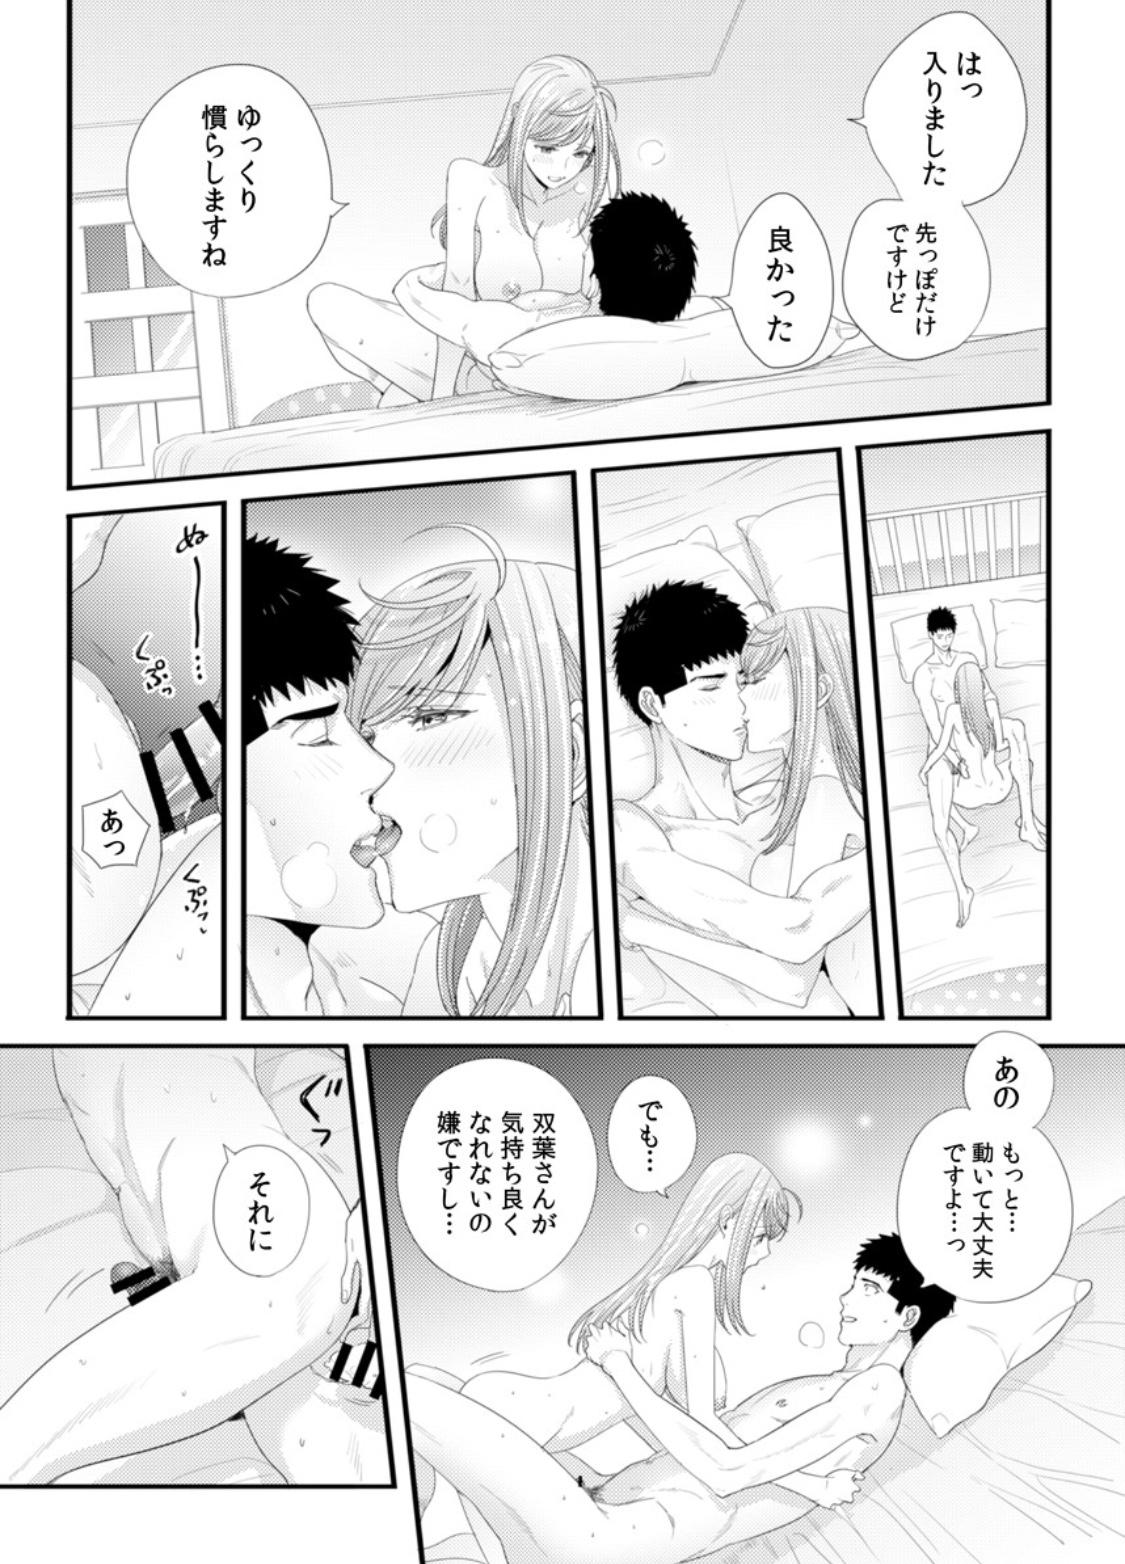 Please Let Me Hold You Futaba-San! Ch. 1+2 59